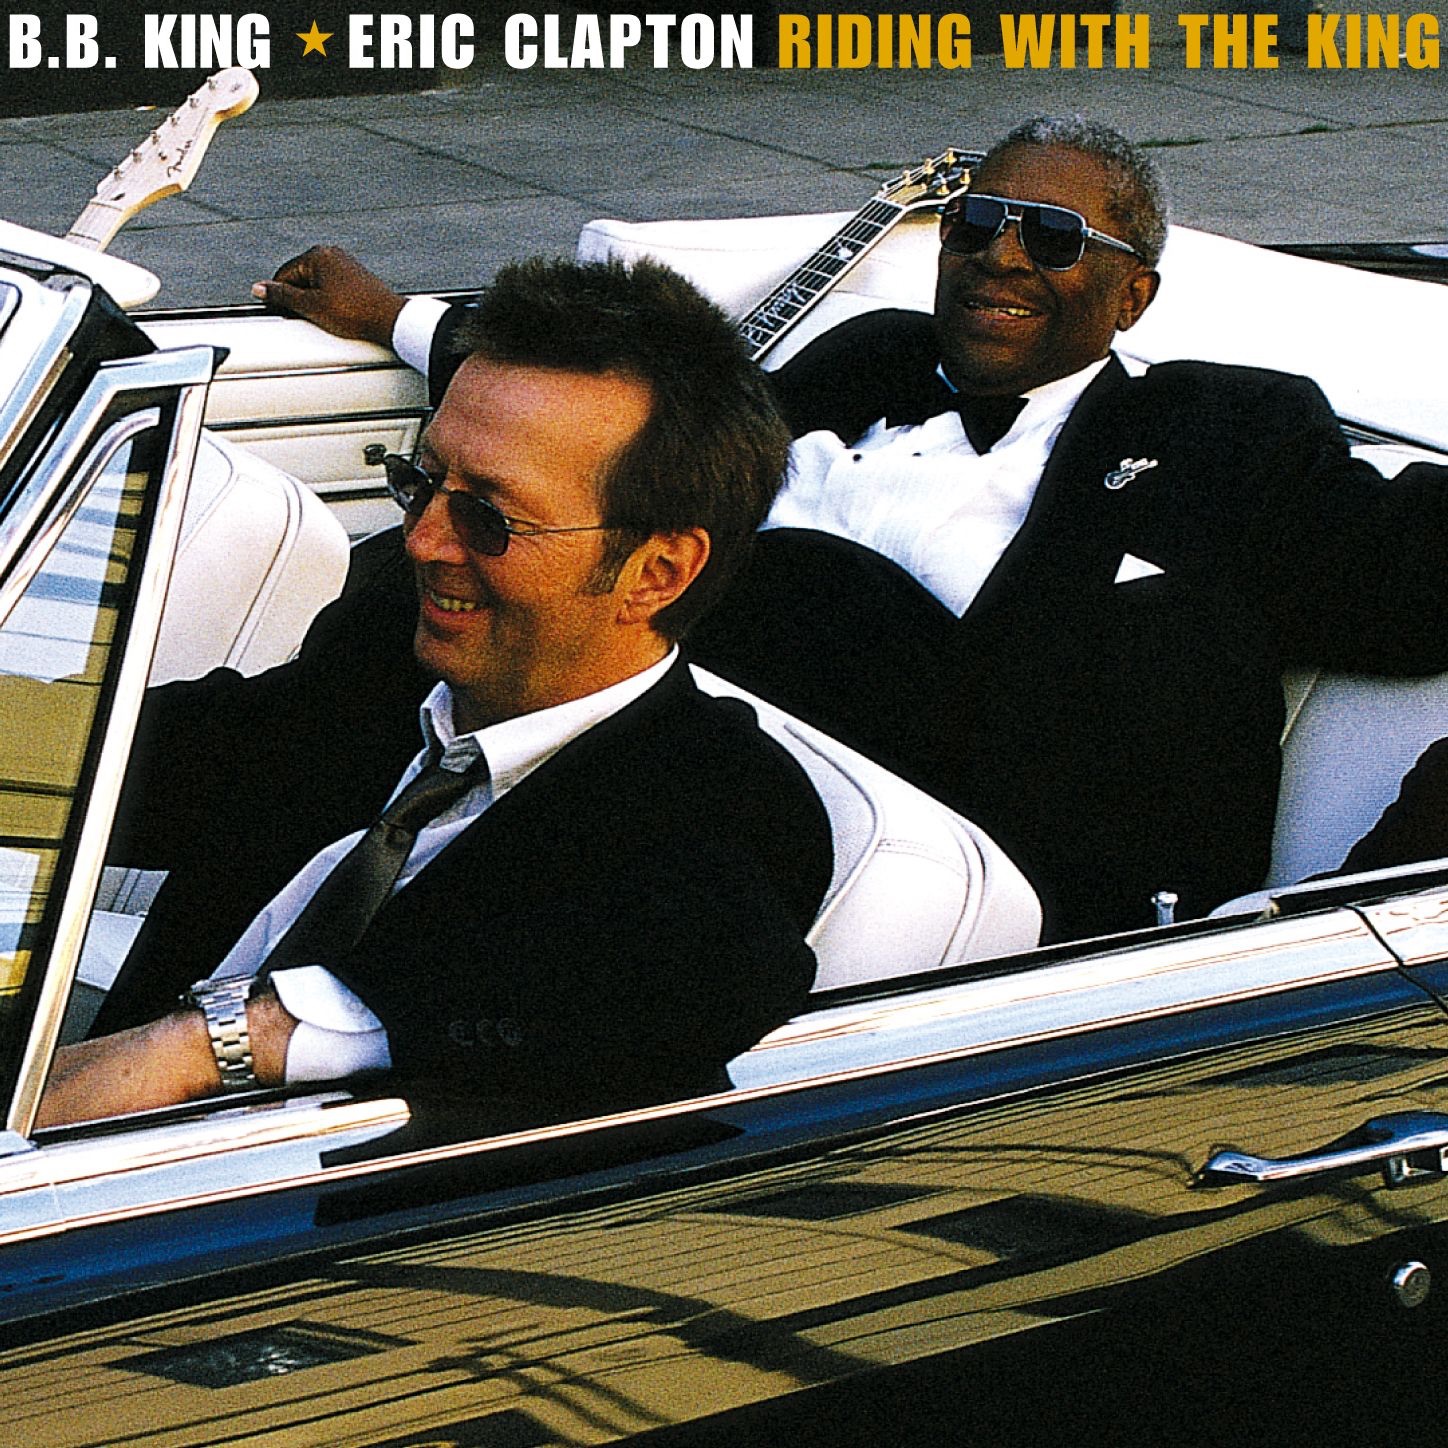 Art for Key to the Highway by B.B. King & Eric Clapton